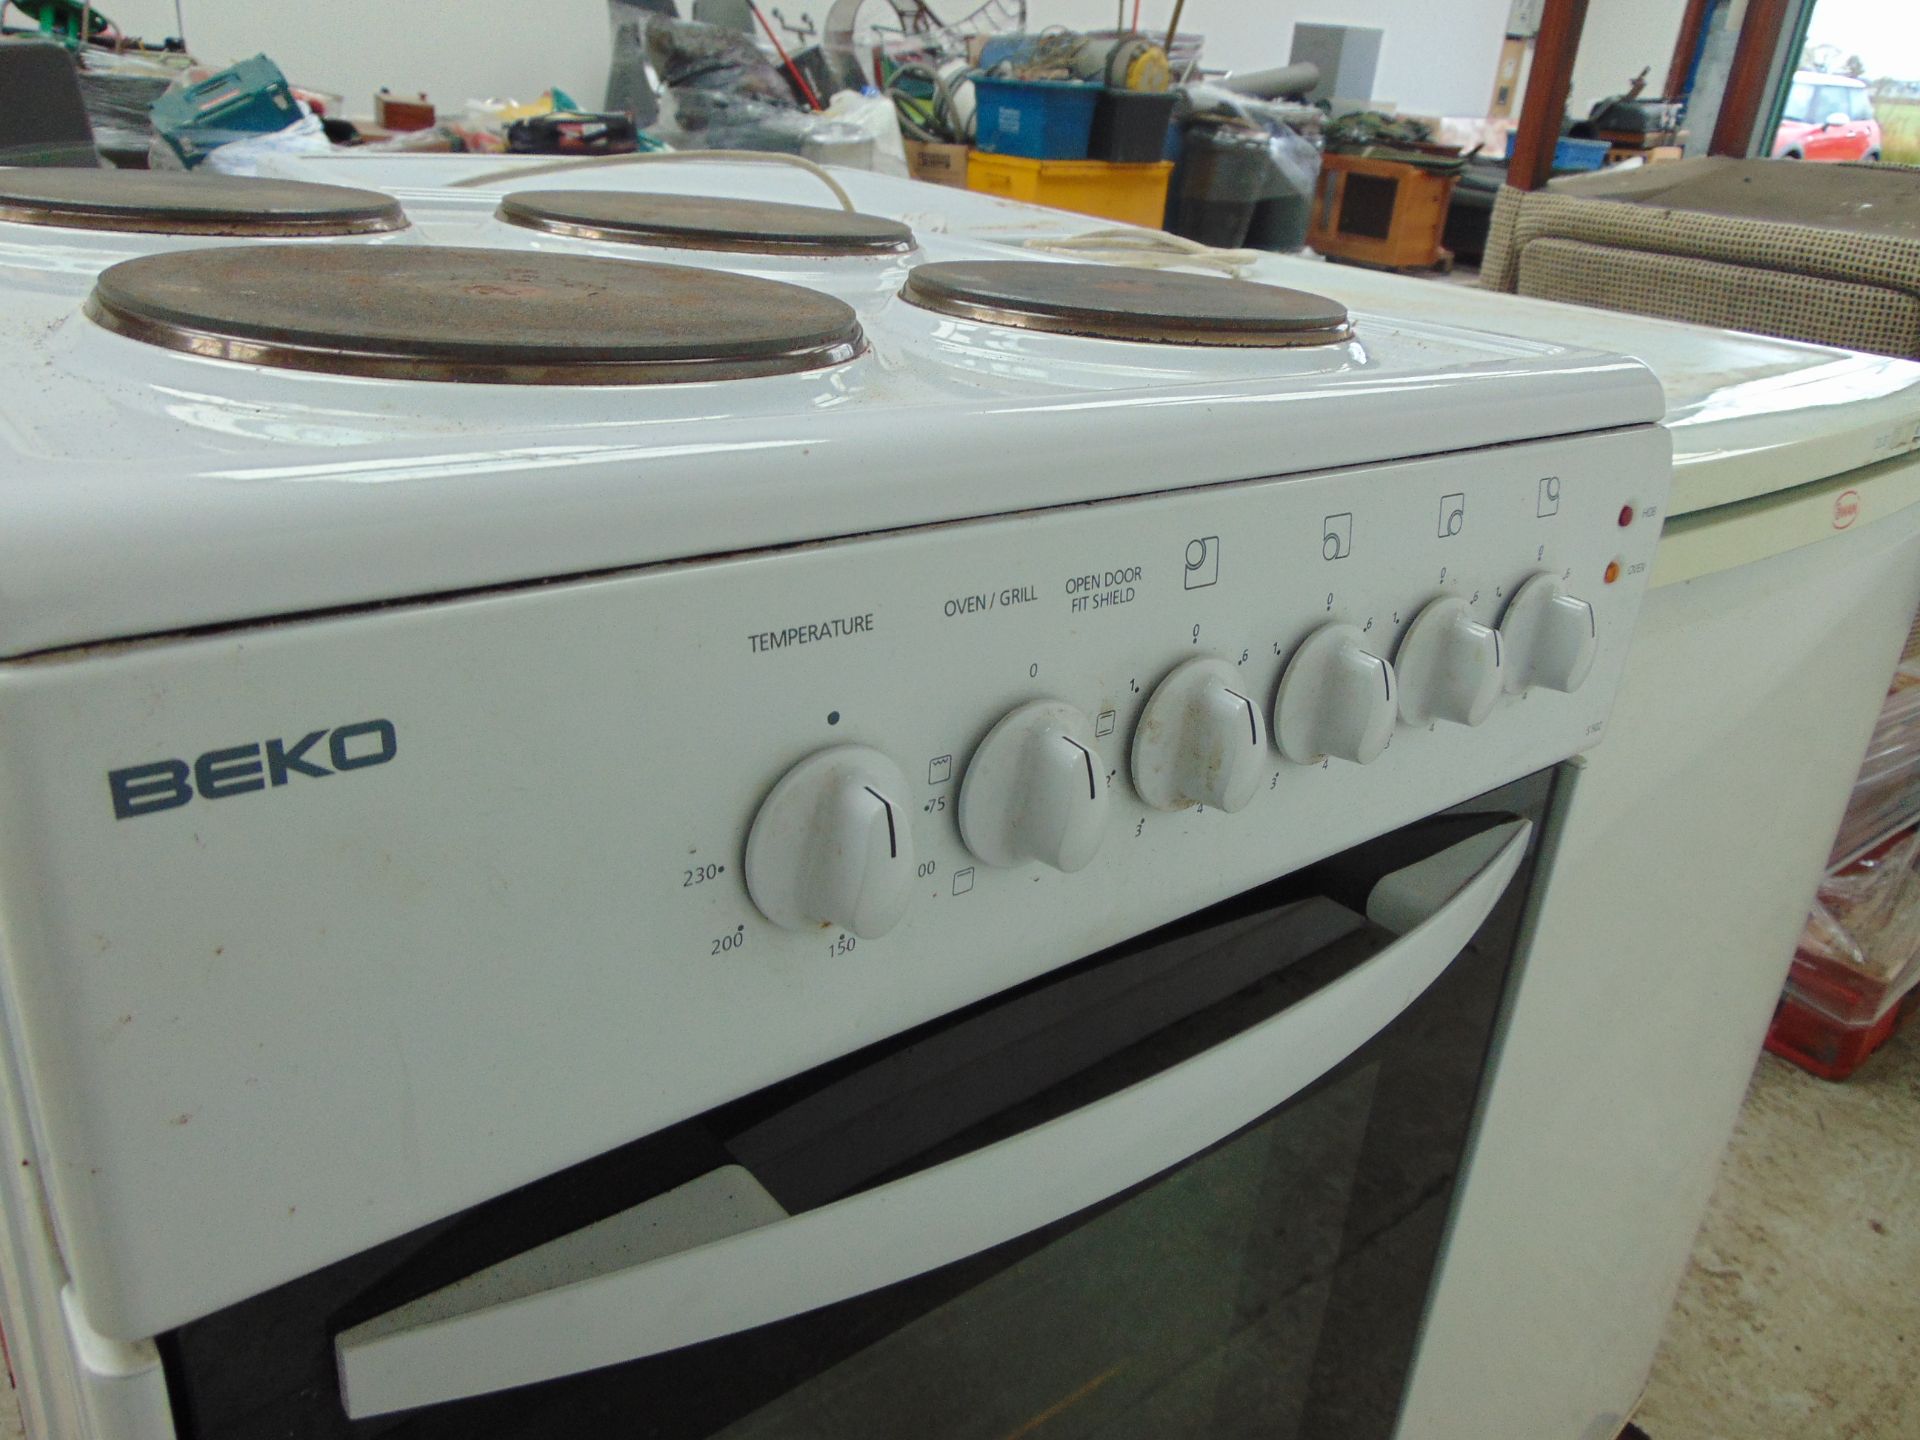 Beko electric oven and x4 hob cooker 240v - Image 2 of 4